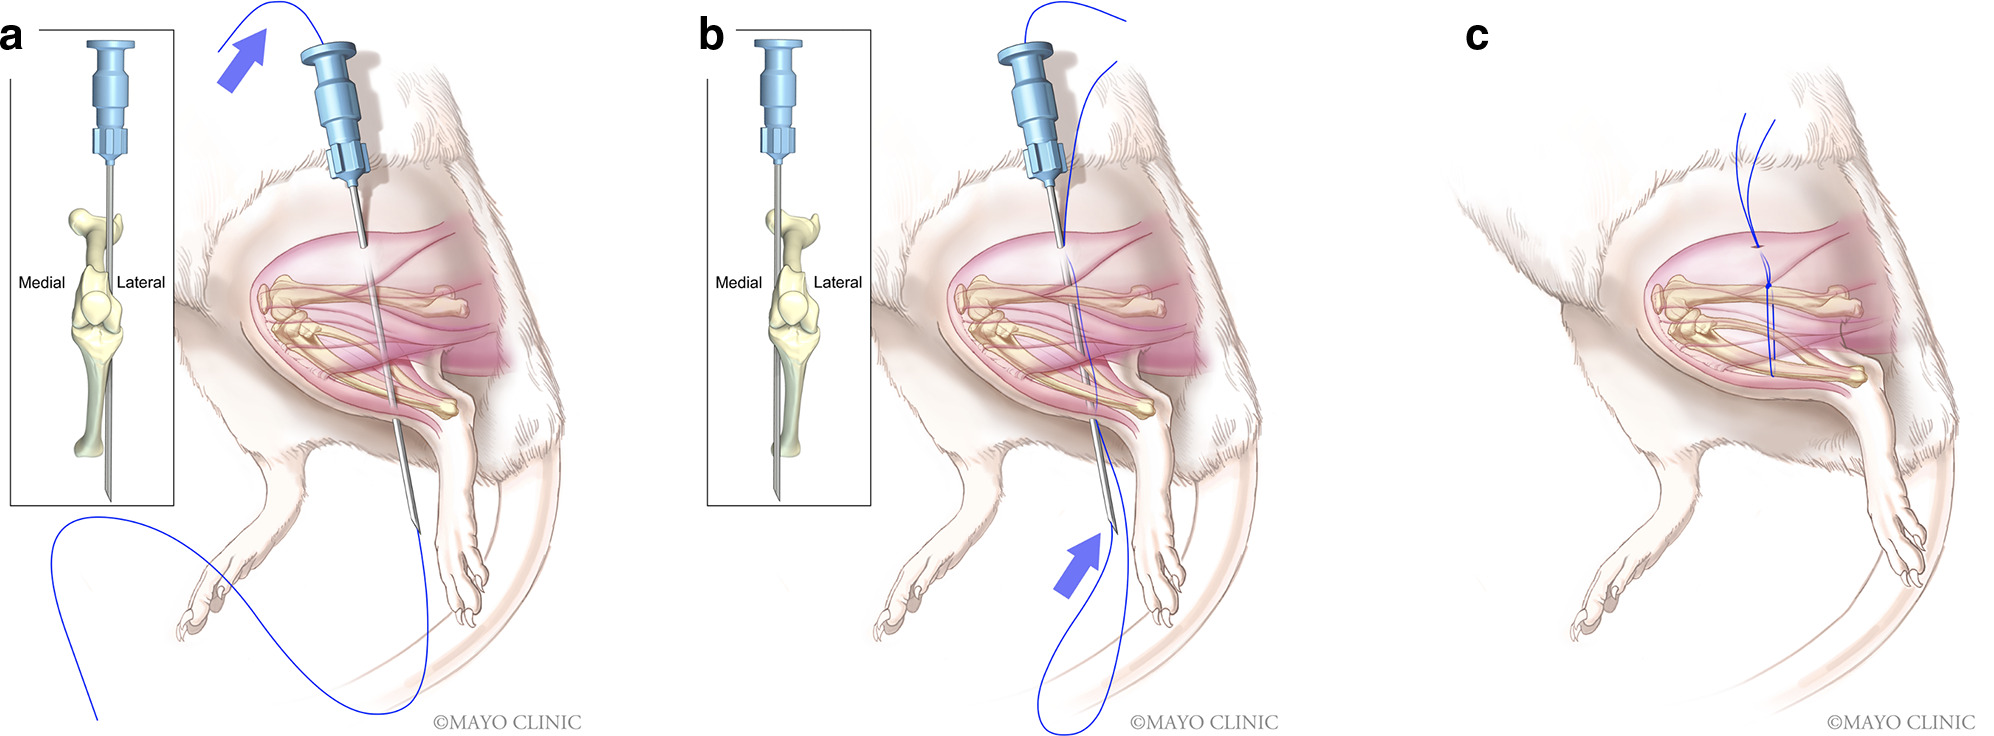 Fig. 2 
            Percutaneous fixation technique used in novel arthrofibrosis mouse model. a) A 21-gauge needle was introduced laterally to the lower limb through a lateral portal between the proximal femur and the distal tibia and a 3-0 nonabsorbable suture was shuttled using the needle. b) After removal, the same needle was introduced through the same lateral portal but medially to the femur, resulting in the creation of a loop with the suture. c) A sliding knot was used to tighten and fix the knee joint at 150° of flexion. The wound was closed and the knot was placed under the skin at the lateral part of the thigh.
          